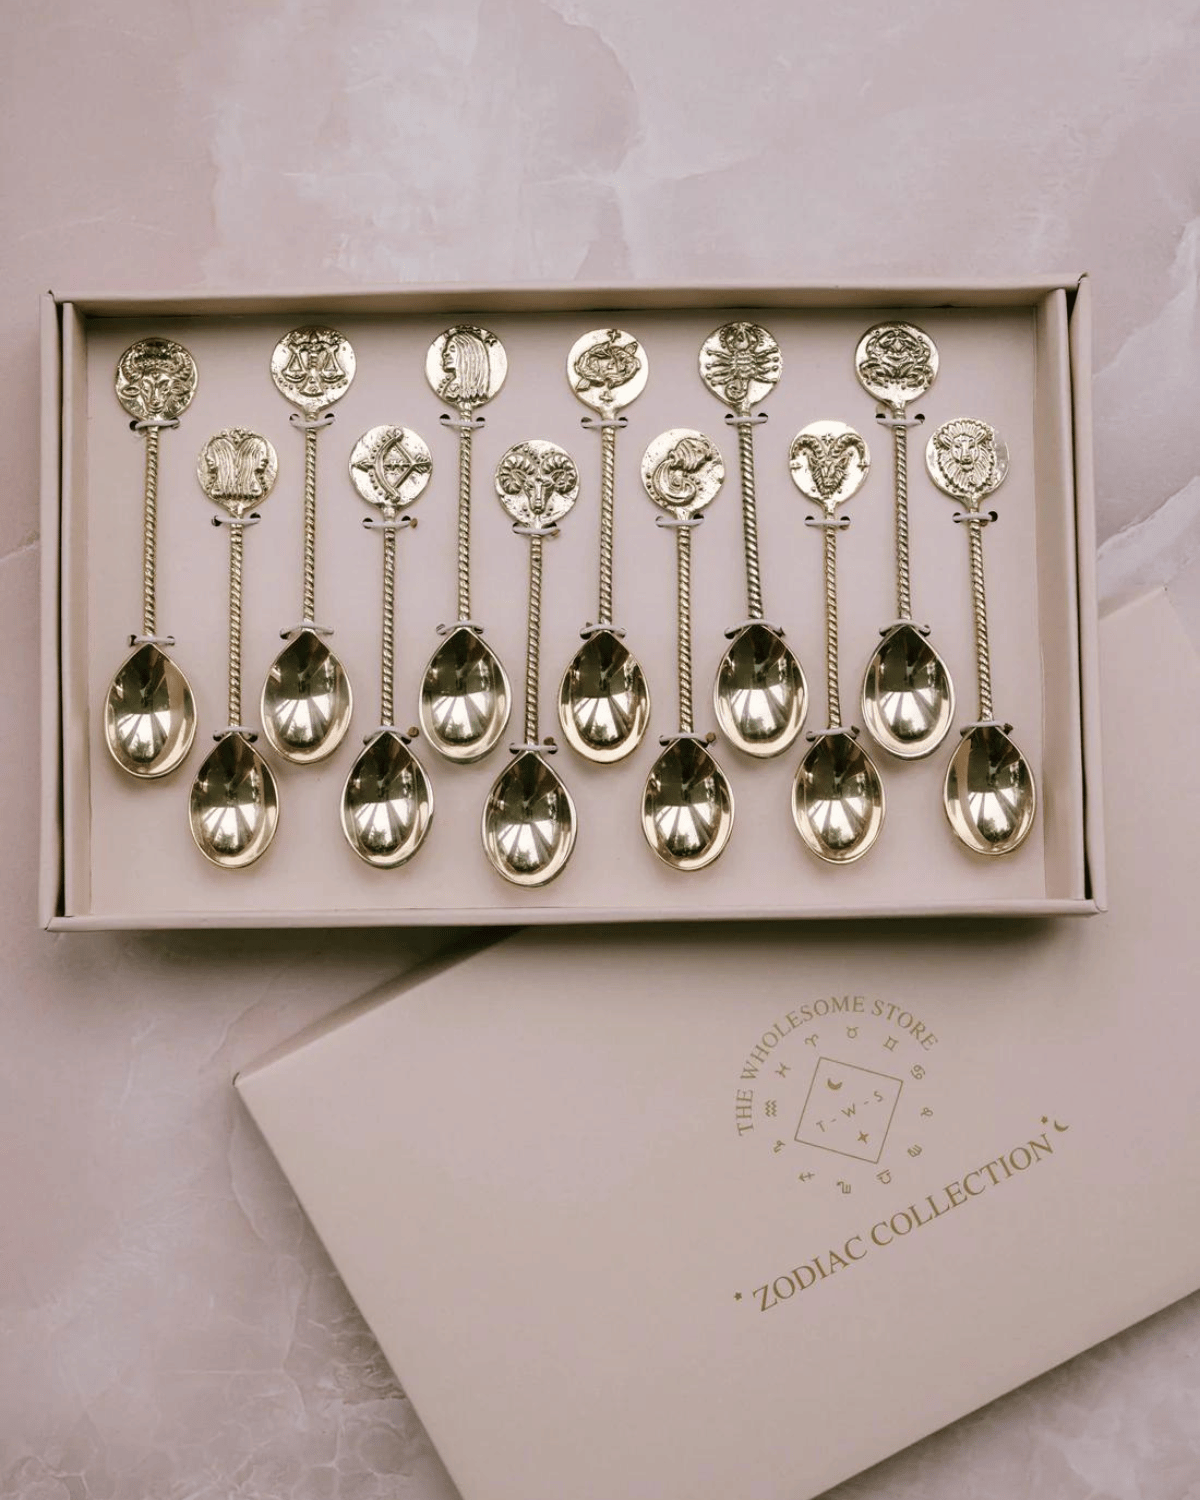 Zodiac Collection Teaspoons (12pc) by The Wholesome Store 🌻